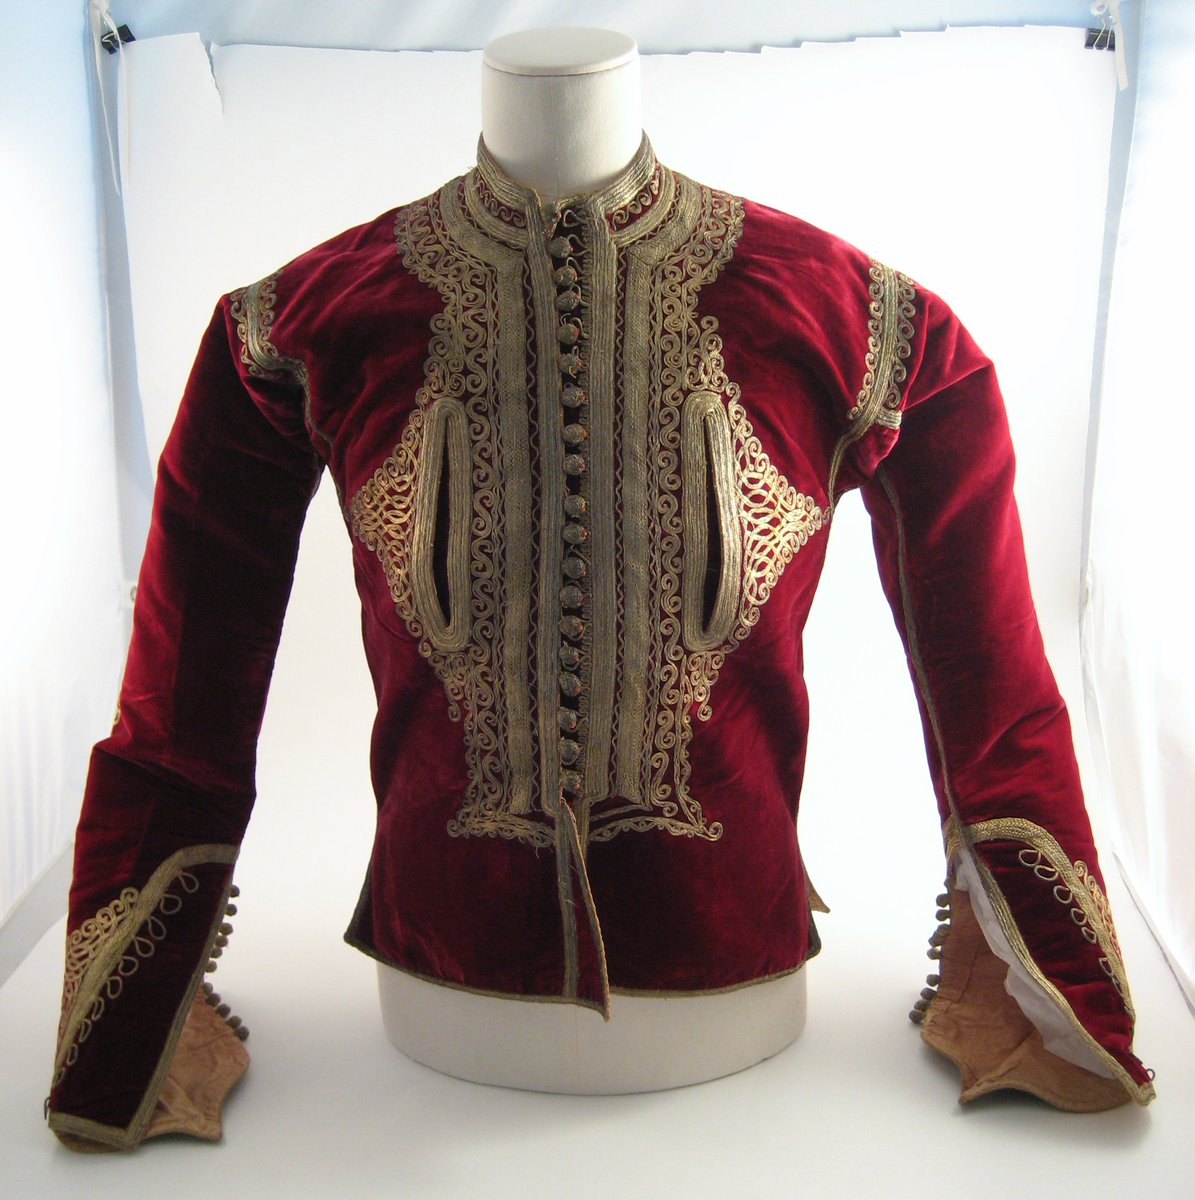 Of course Byron also knew how to dress to impress. He brought this red velvet suit back to Newstead from Albania. It set him back a mere 50 quid. He wrote that Albanian clothing was ‘the most magnificent in the world’. #MuseumPassion #CURATORBATTLE #BestPartyObject/5